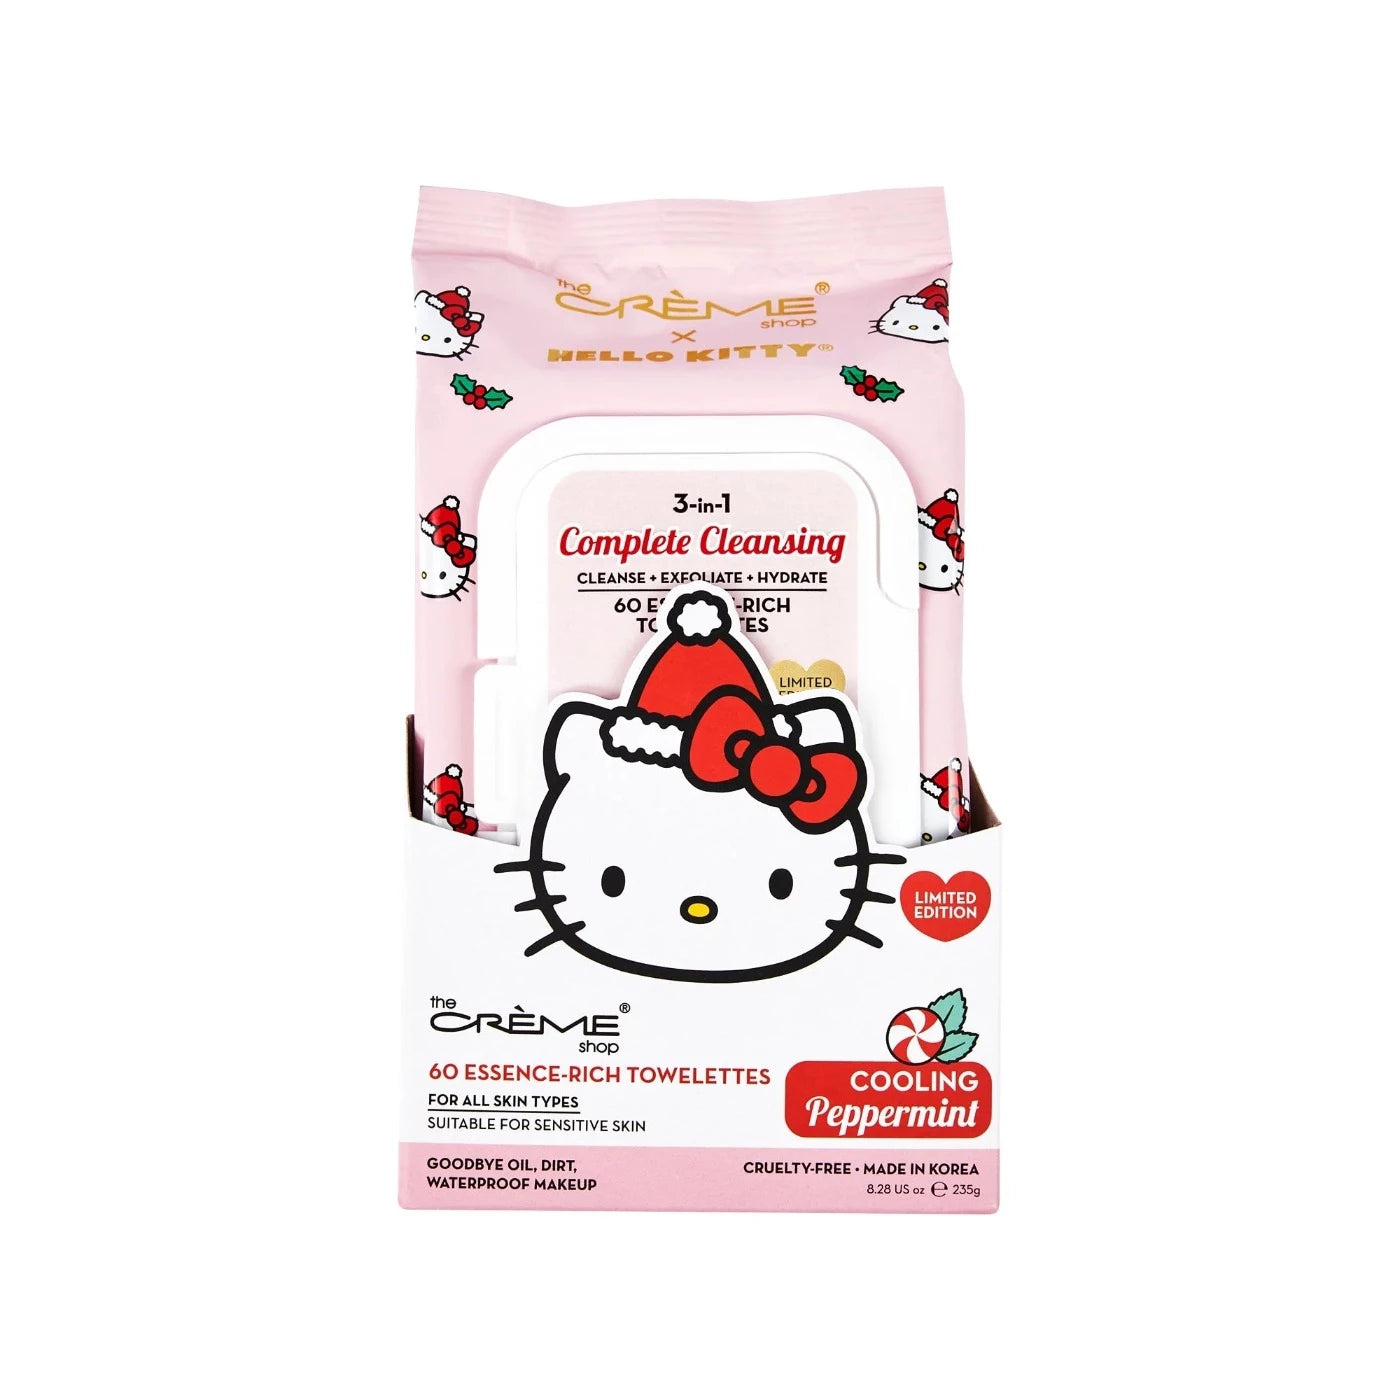 The Crème Shop Hello Kitty 3-IN-1 Complete Cleansing Essence-Rich  Towelettes - Cooling Peppermint